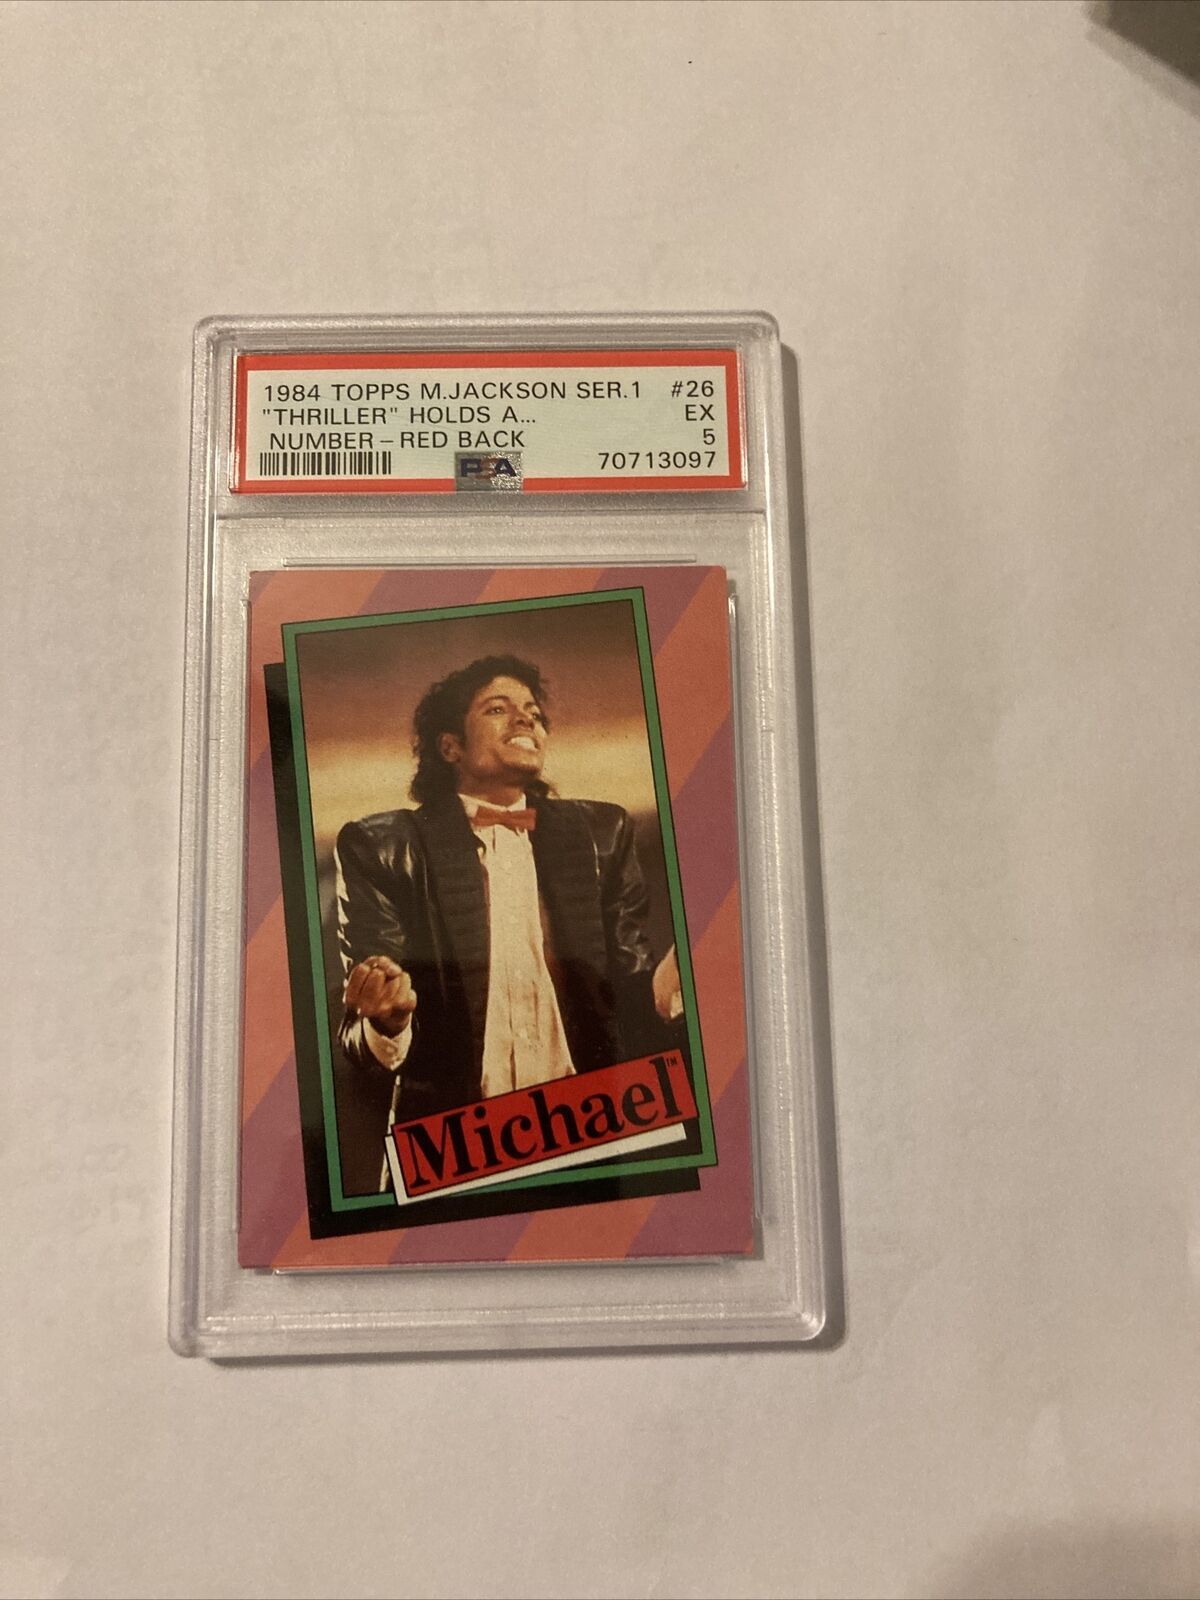 1984 Topps Michael Jackson series 1 “Thriller “  holds a number.. #26 PSA 5